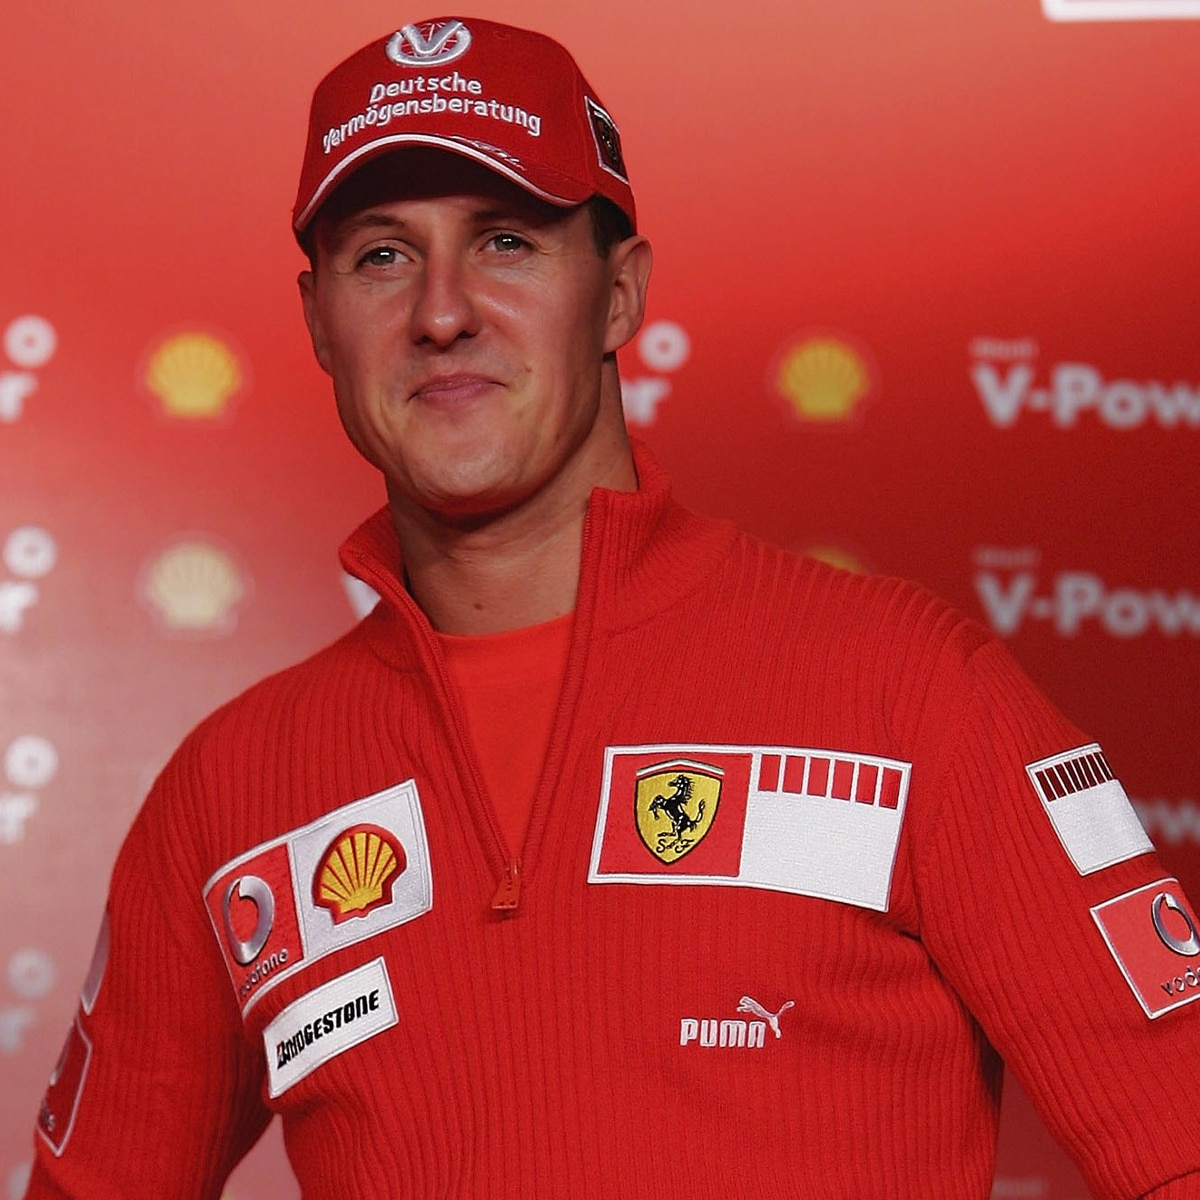 F1 Star Michael Schumacher's Family Suing Magazine Over AI Interview